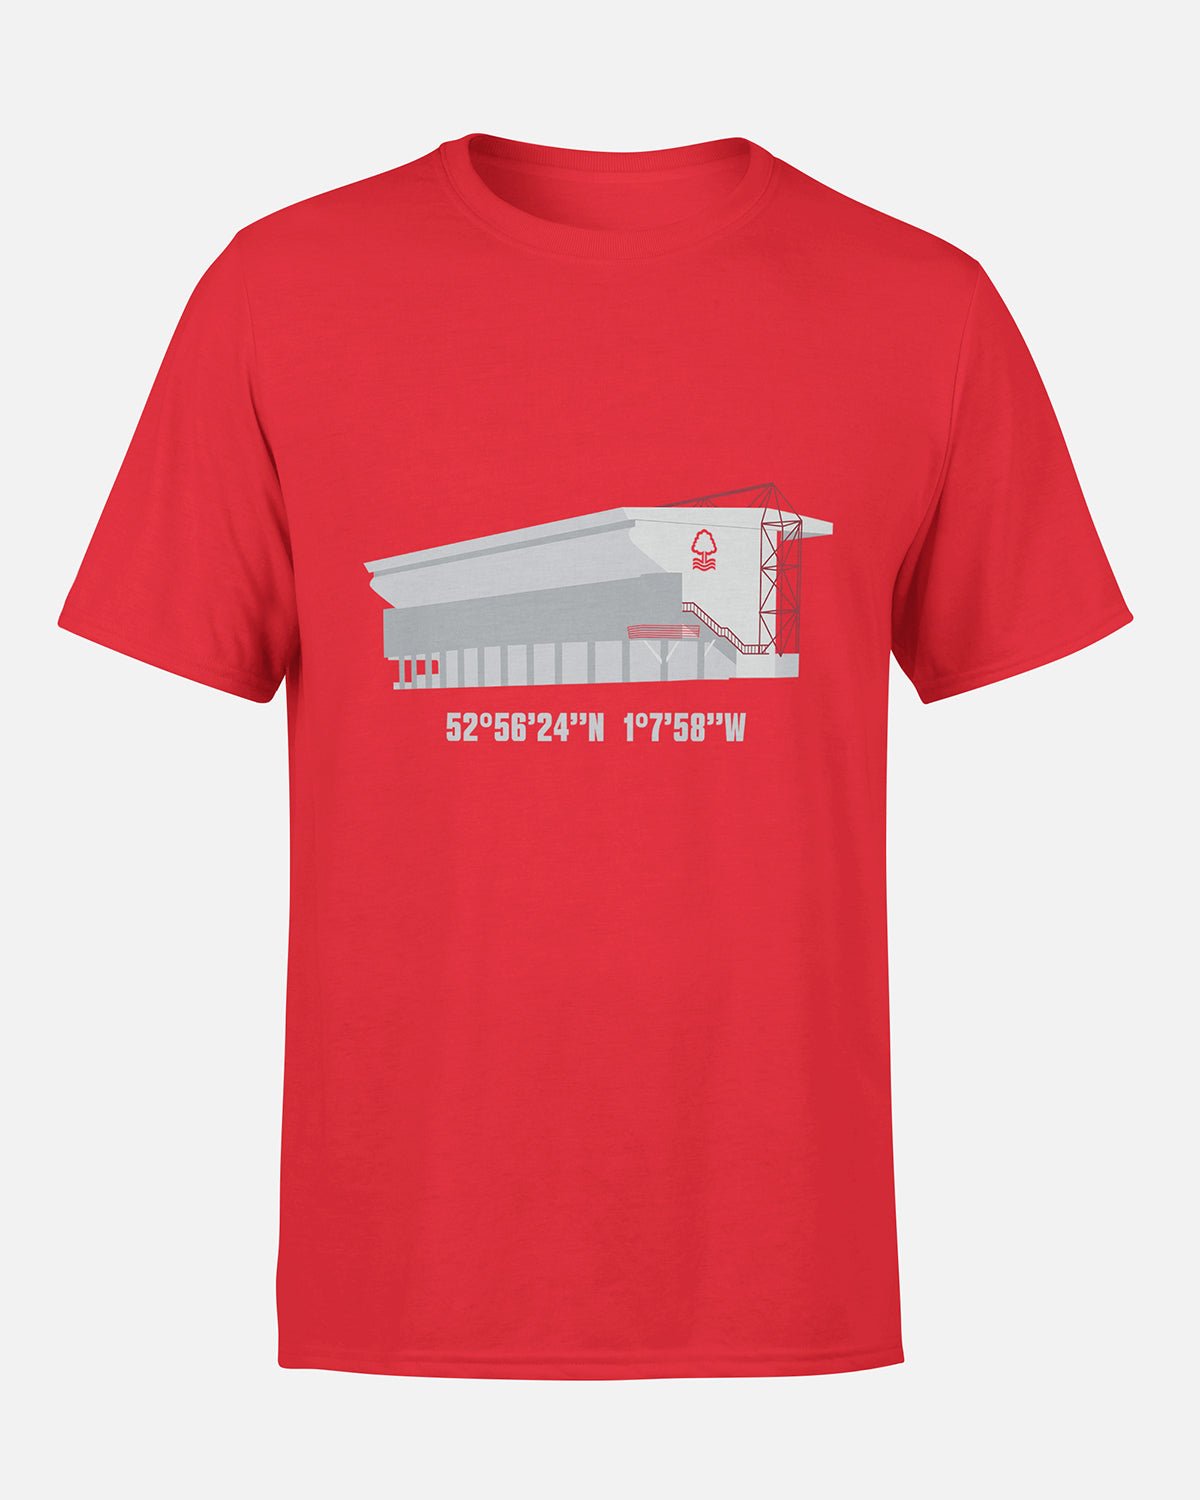 NFFC Adult Red Trent End T-Shirt - Nottingham Forest FC